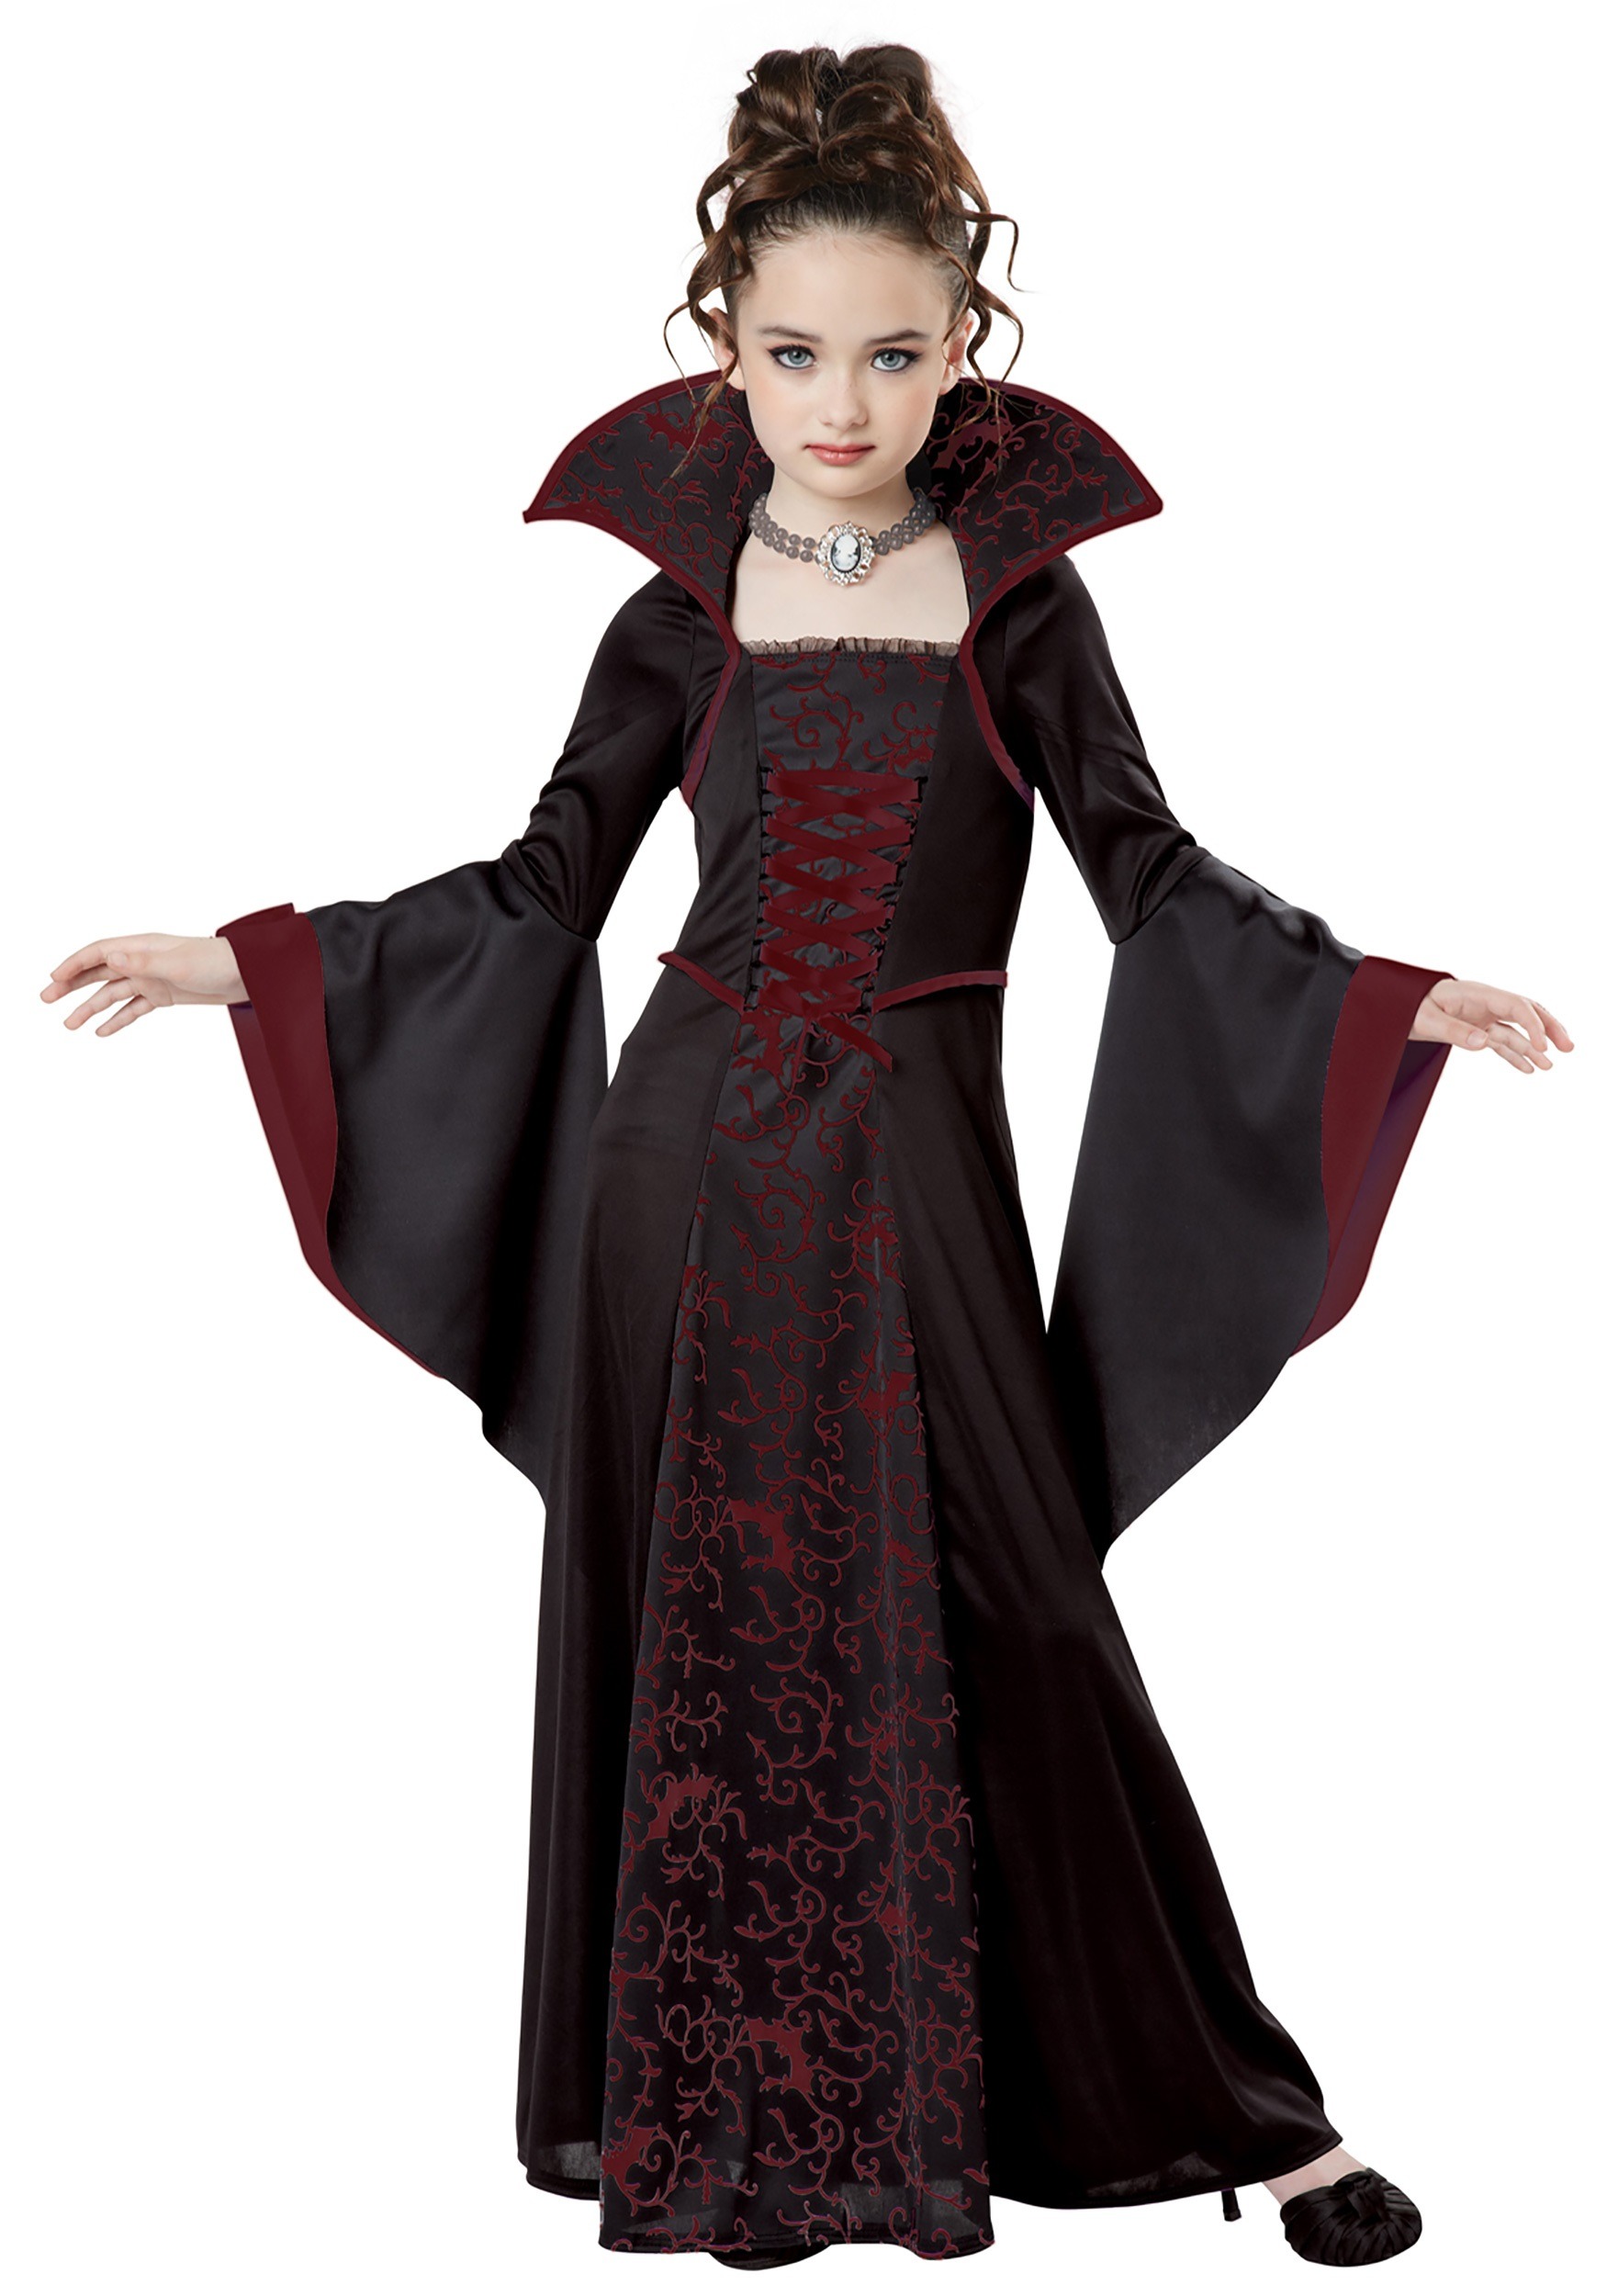 Photos - Fancy Dress California Costume Collection Girls Royal Vampire Costume Black/Red CA 